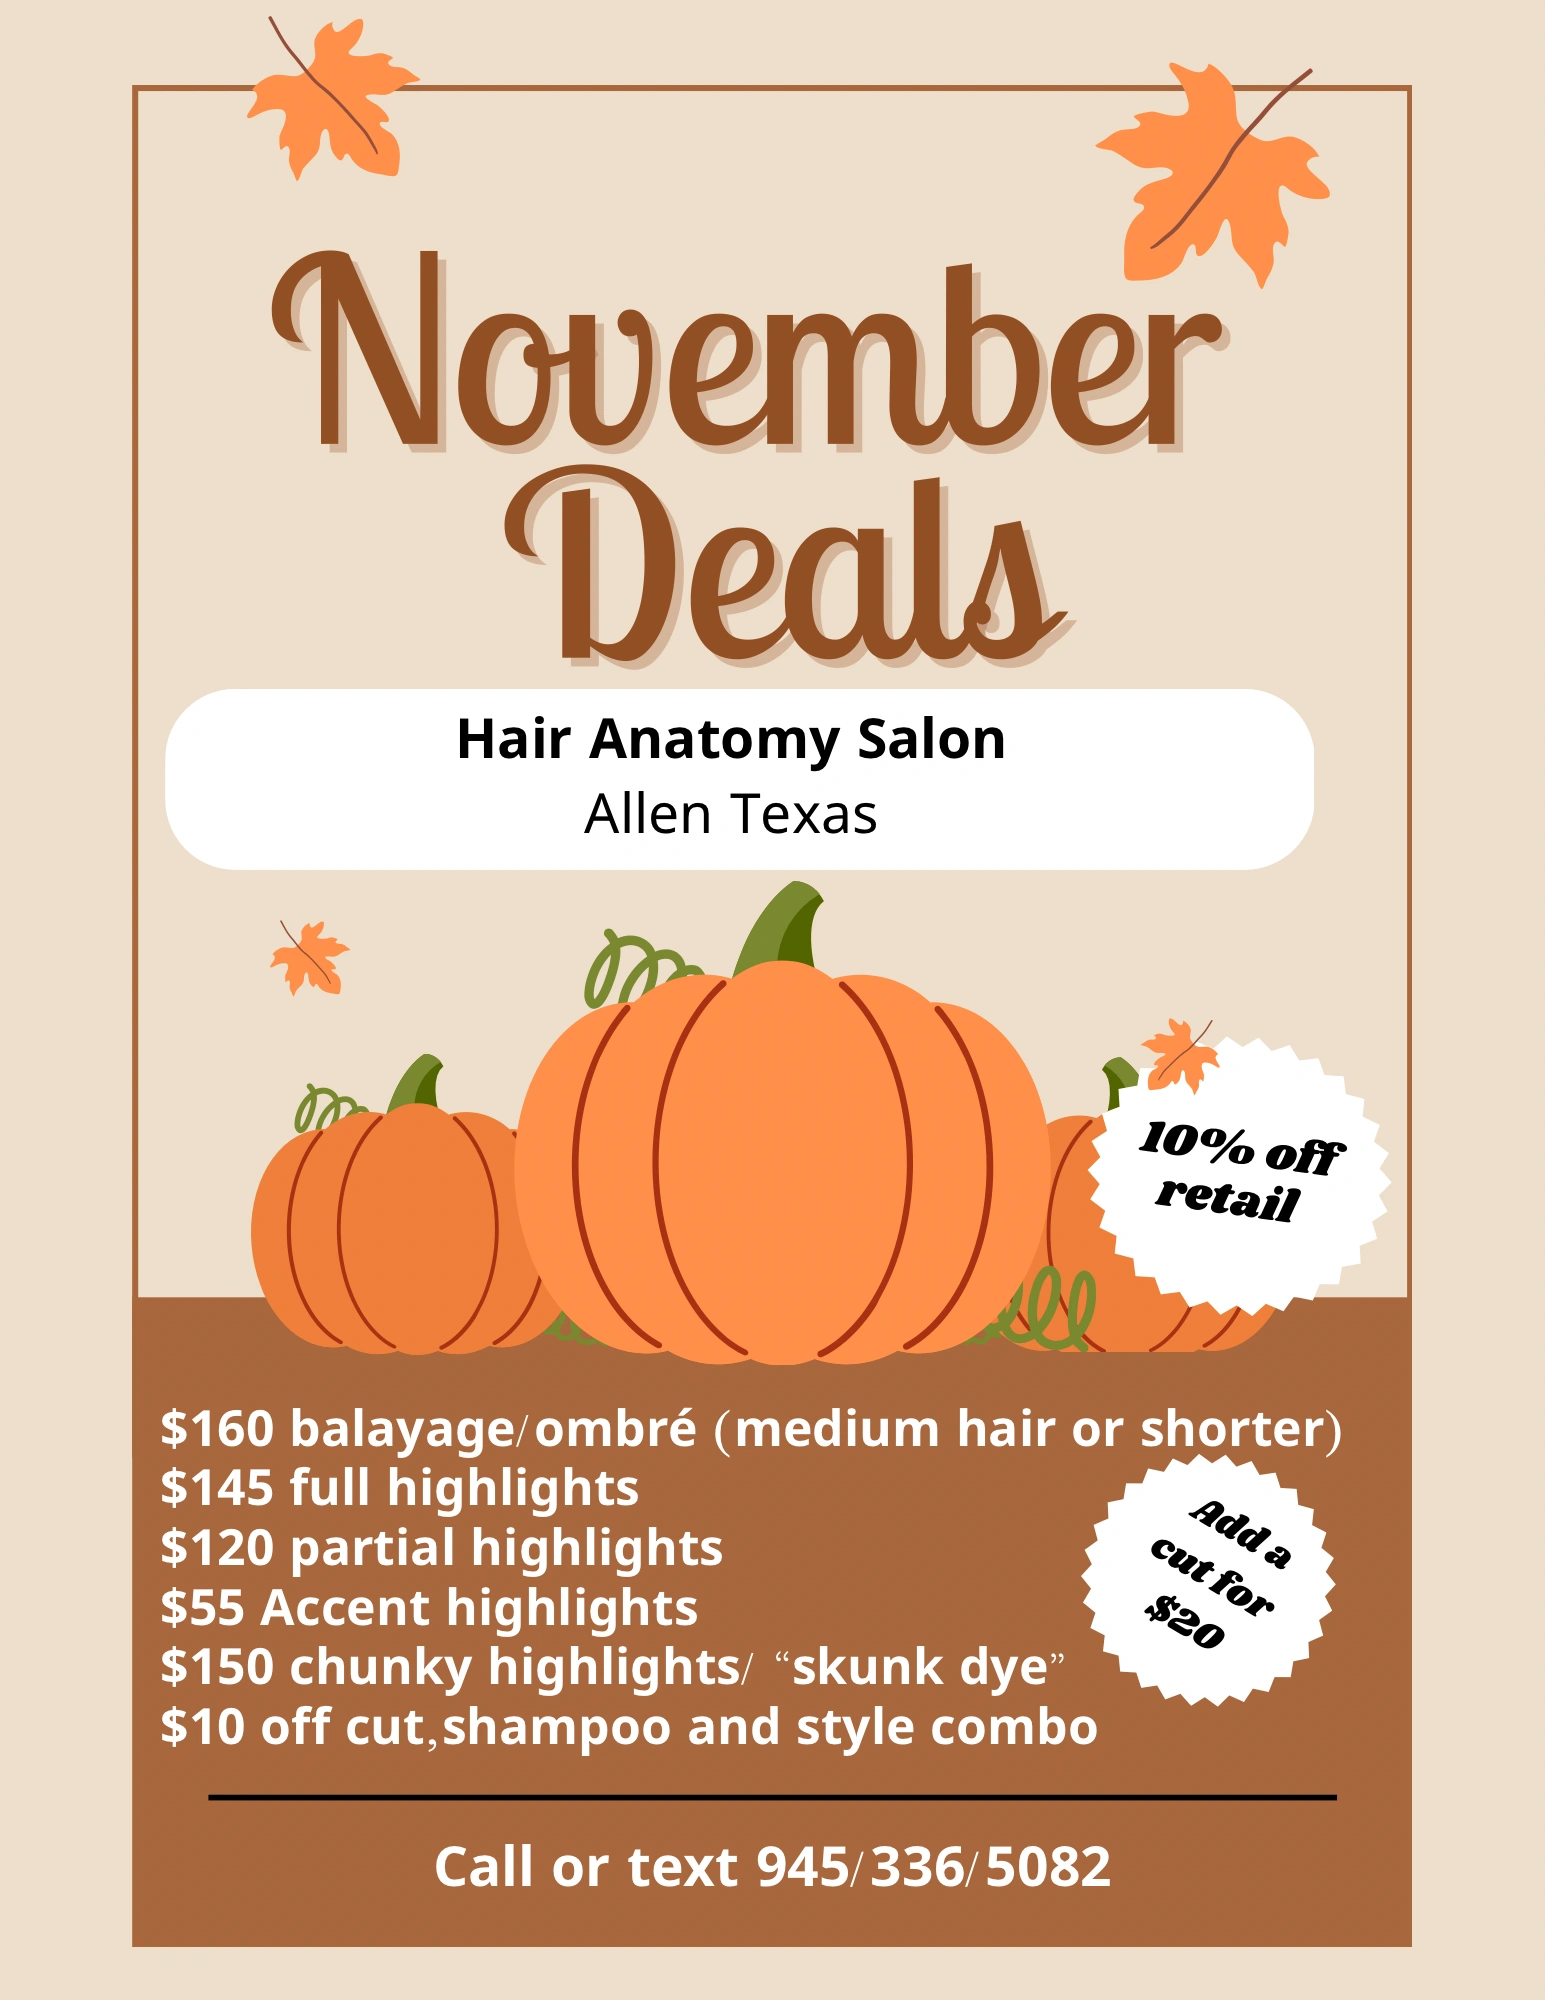 November hair specials and deals ! 
Highlights, skunk dye, chunky highlights, balayage
Allen Texas  